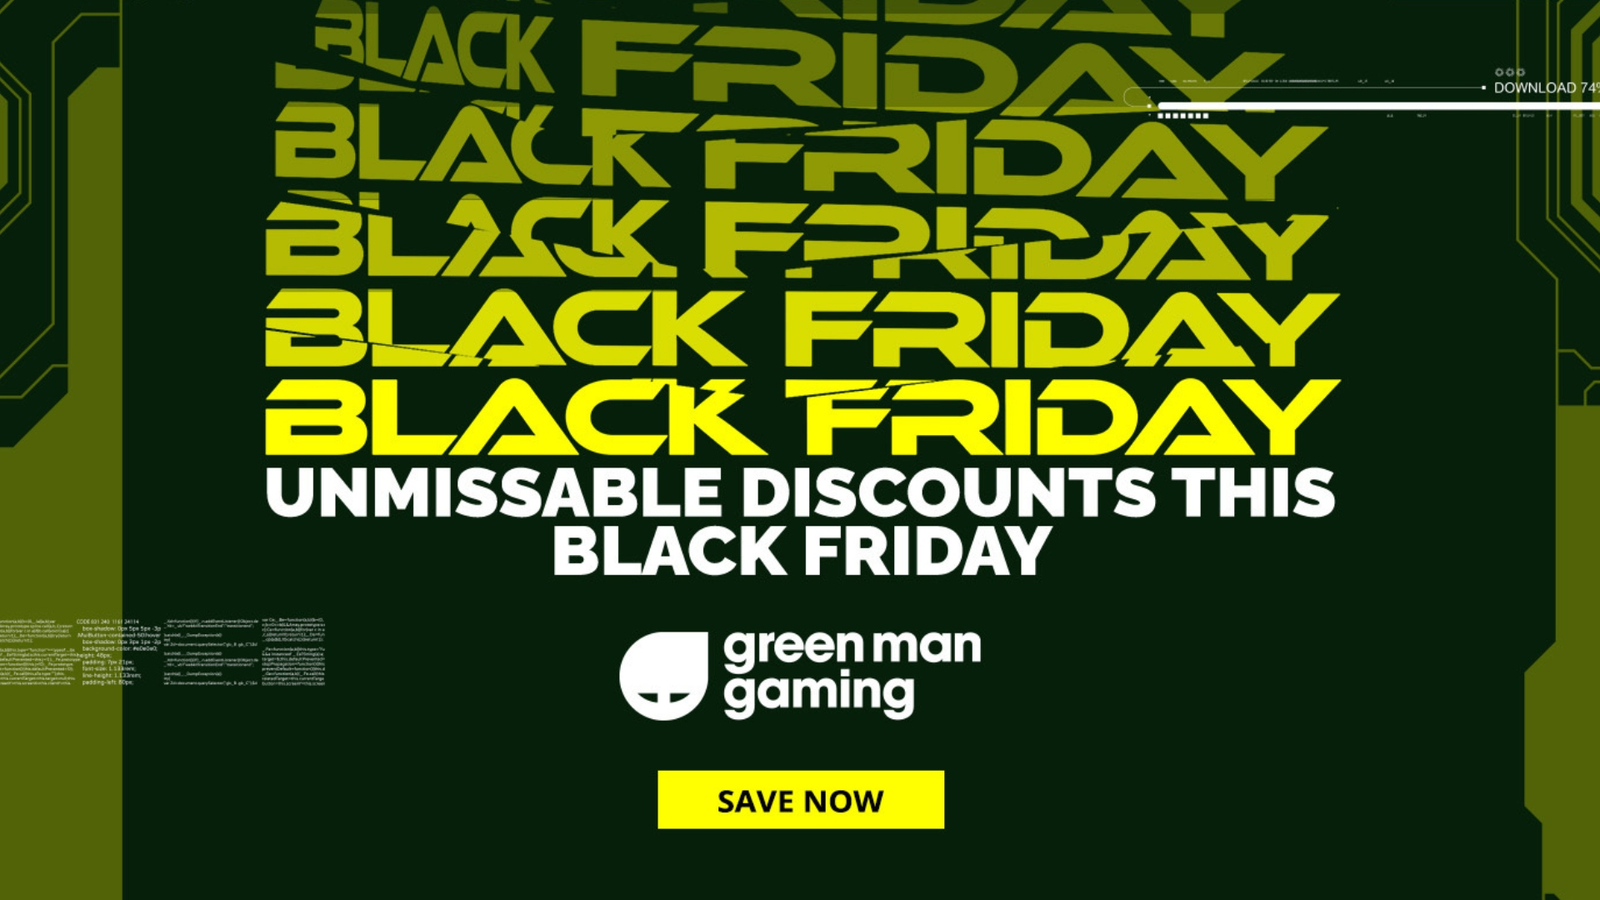 Black Friday Sales for Video Games now ongoing